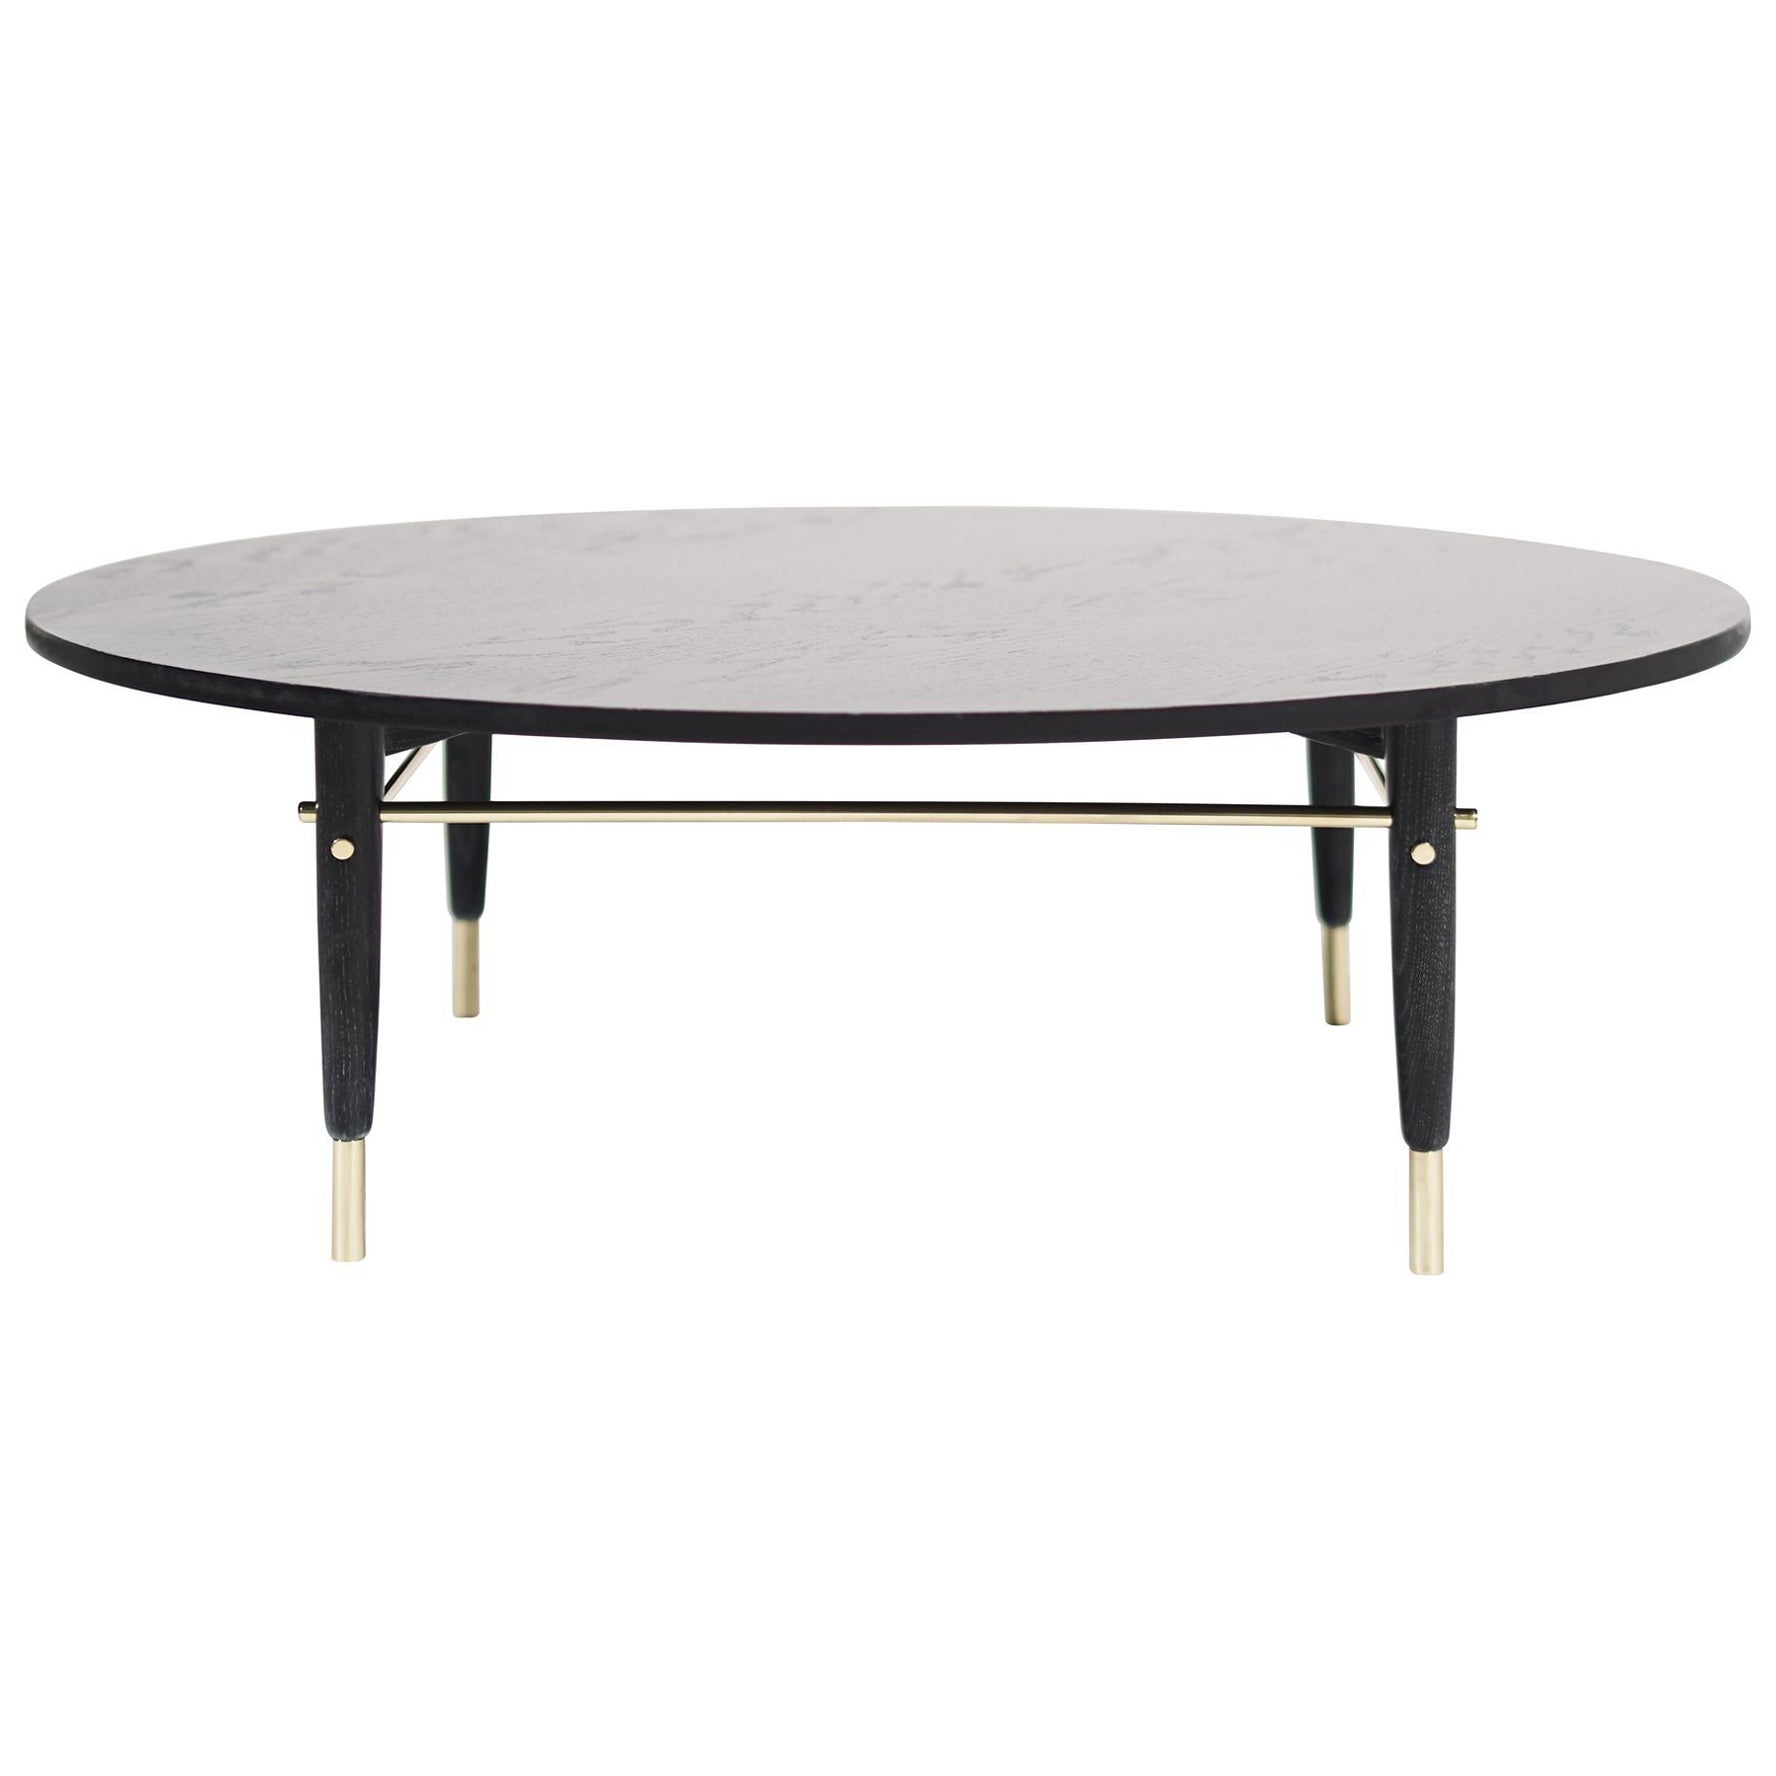 Brass Accented Coffee Table in Black Ceruse, C. 1950s For Sale